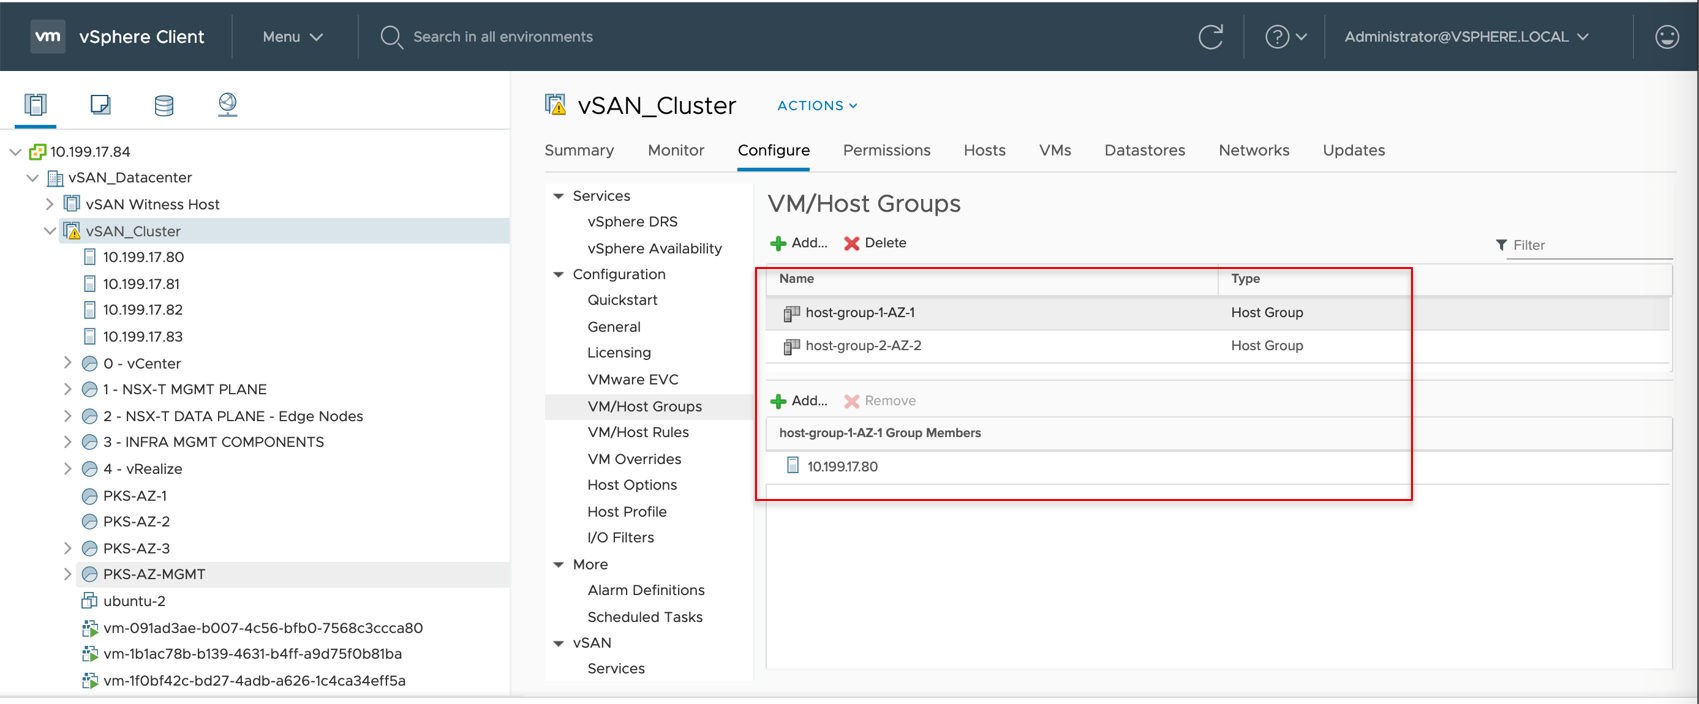 New Host Group added to the VM/Host Groups section of the vSAN_Cluster tab.